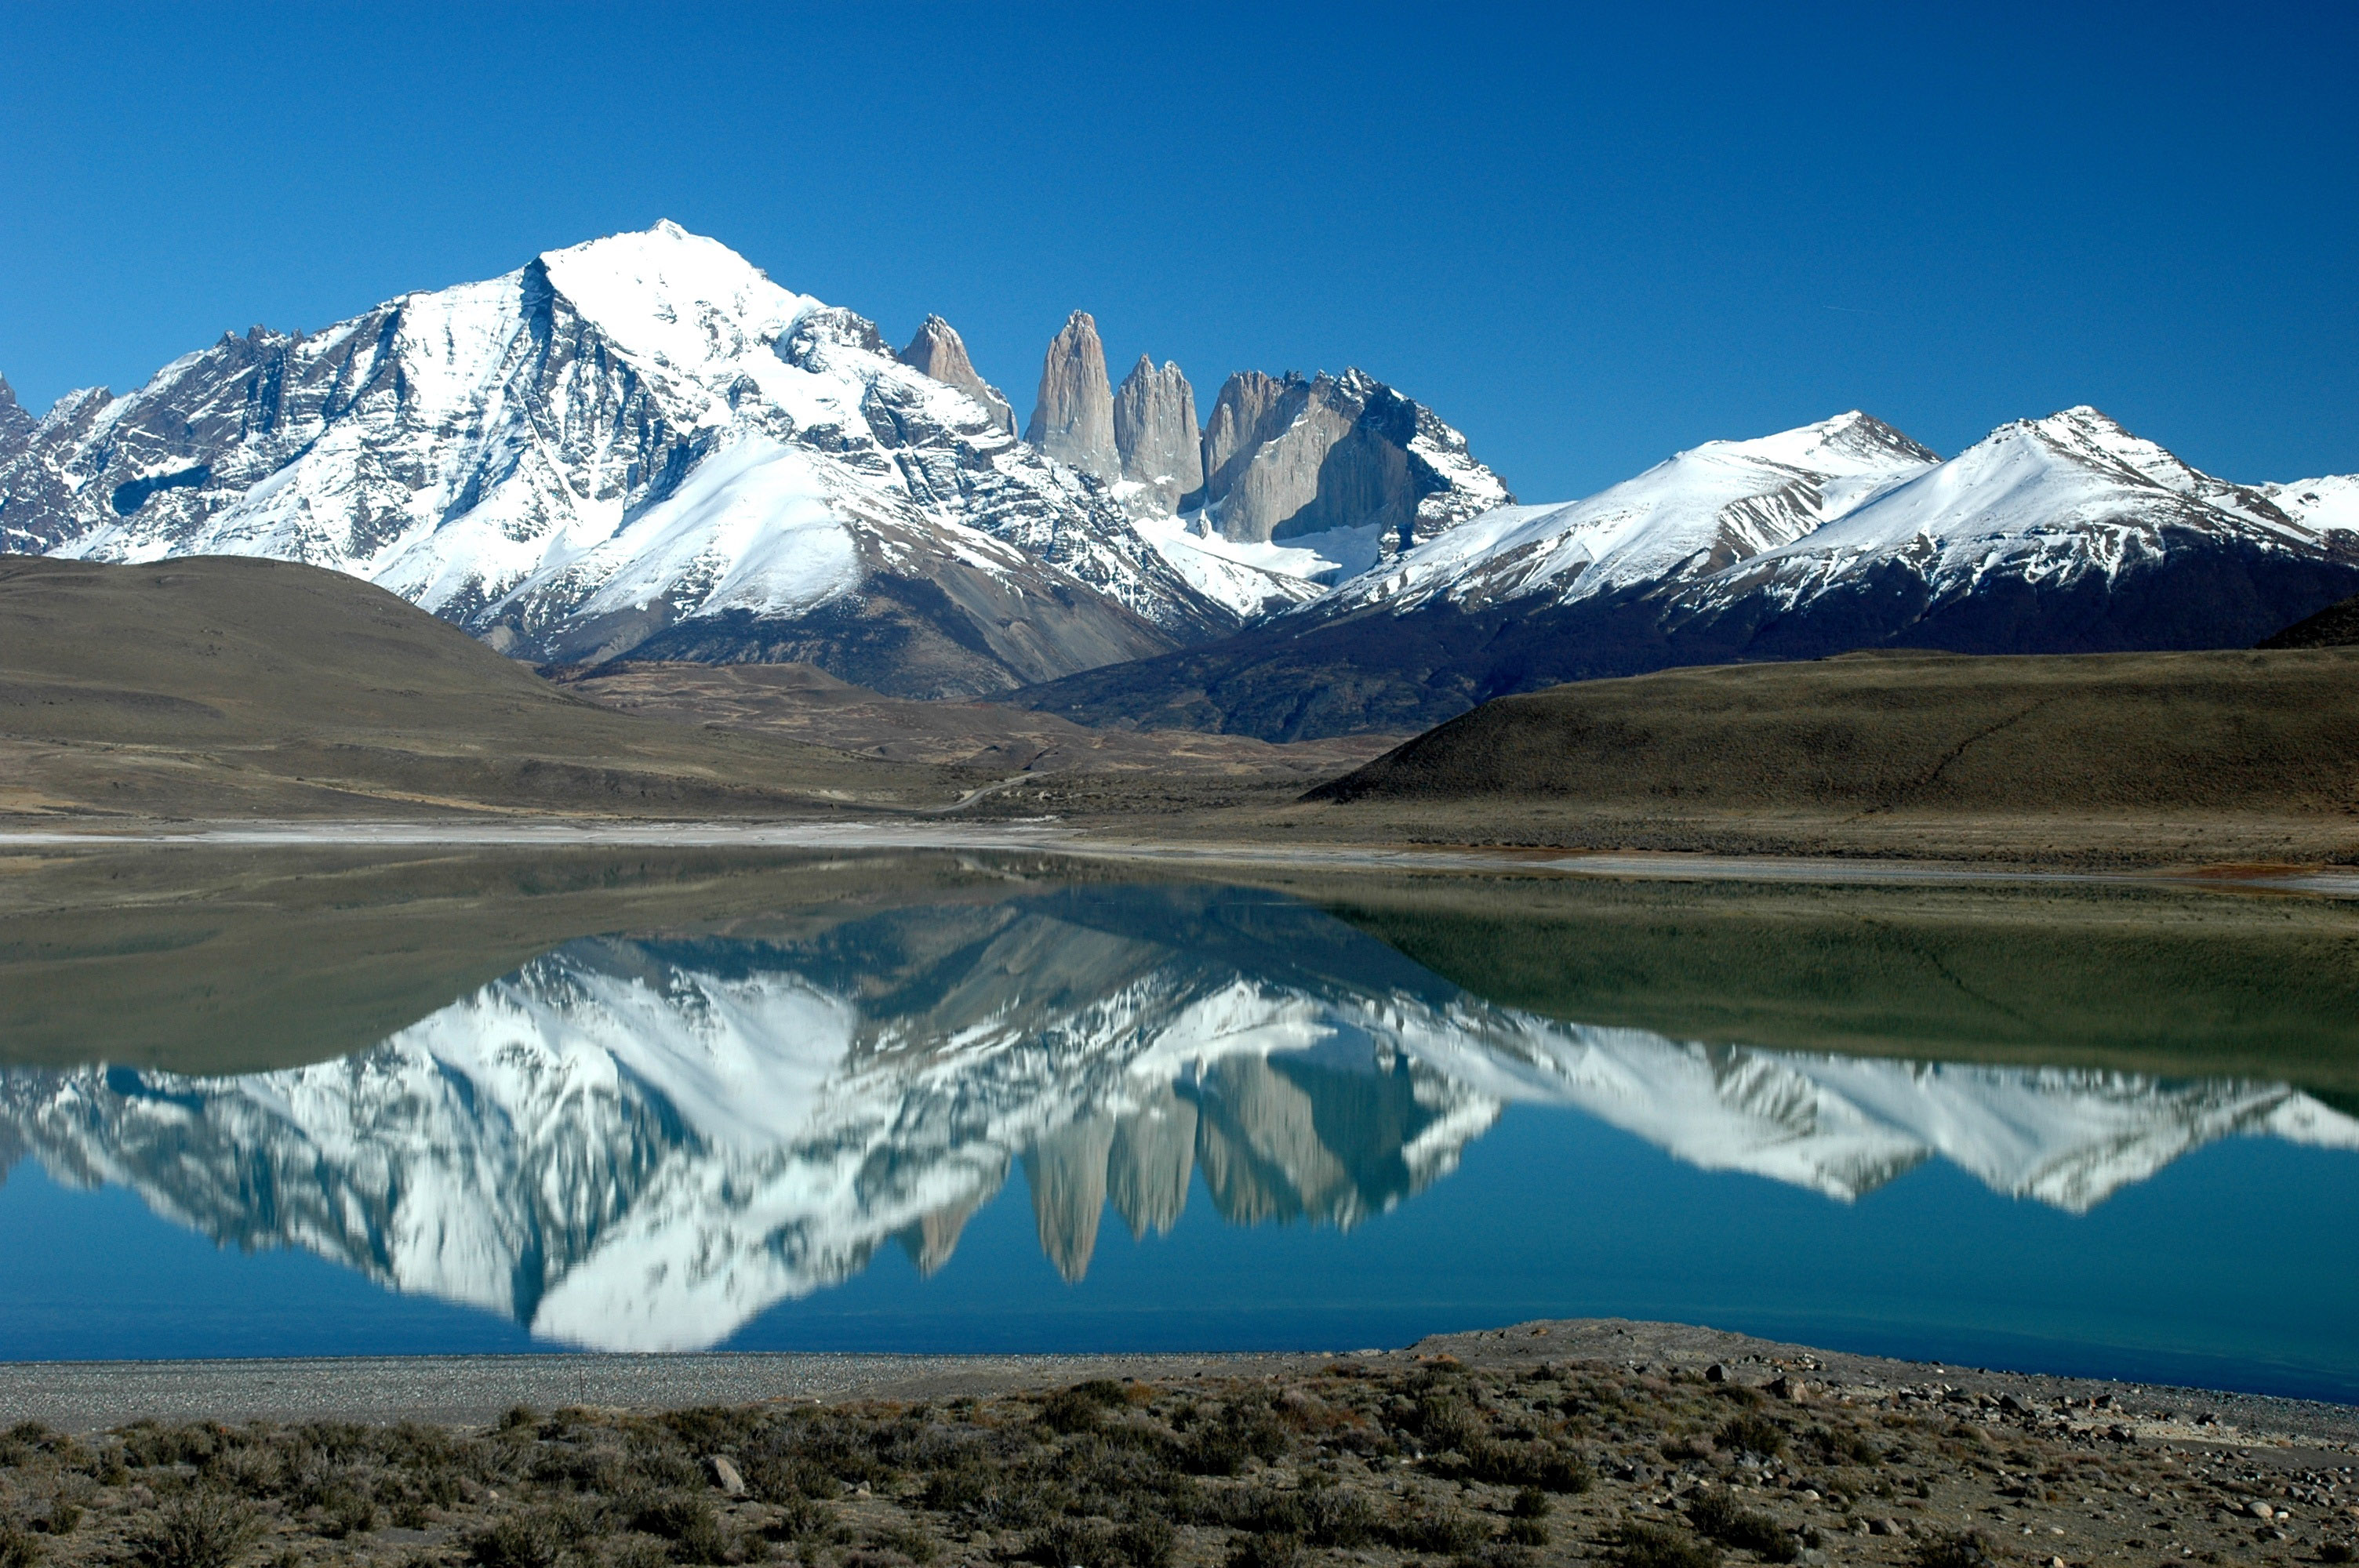 Andes Mountains Lake Reflection landscape in Argentina image - Free